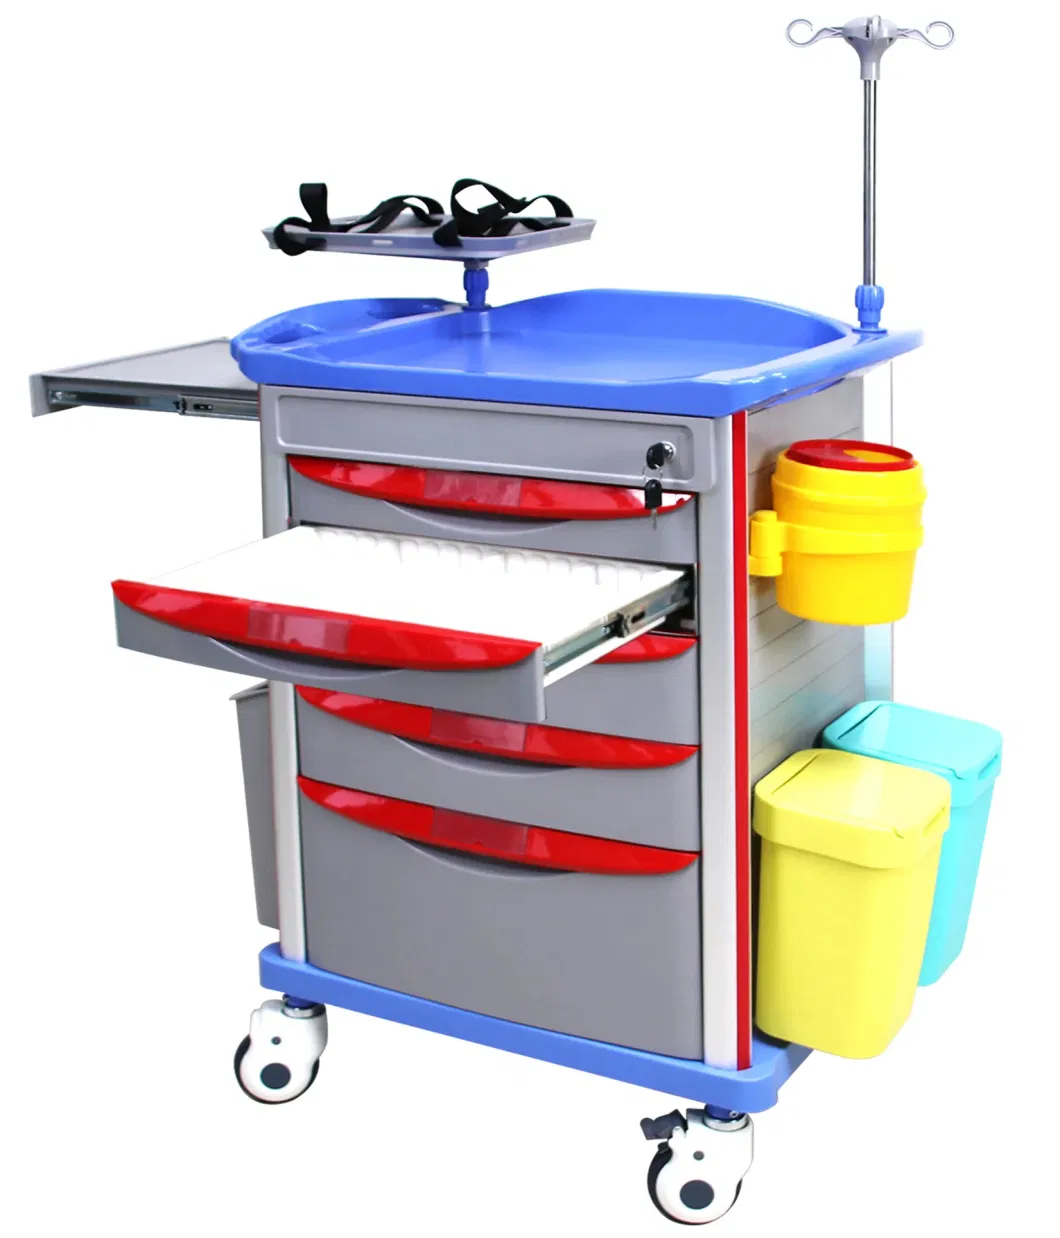 Multi-Function Medical Emergency Trolley Cart with ABS Table Surface